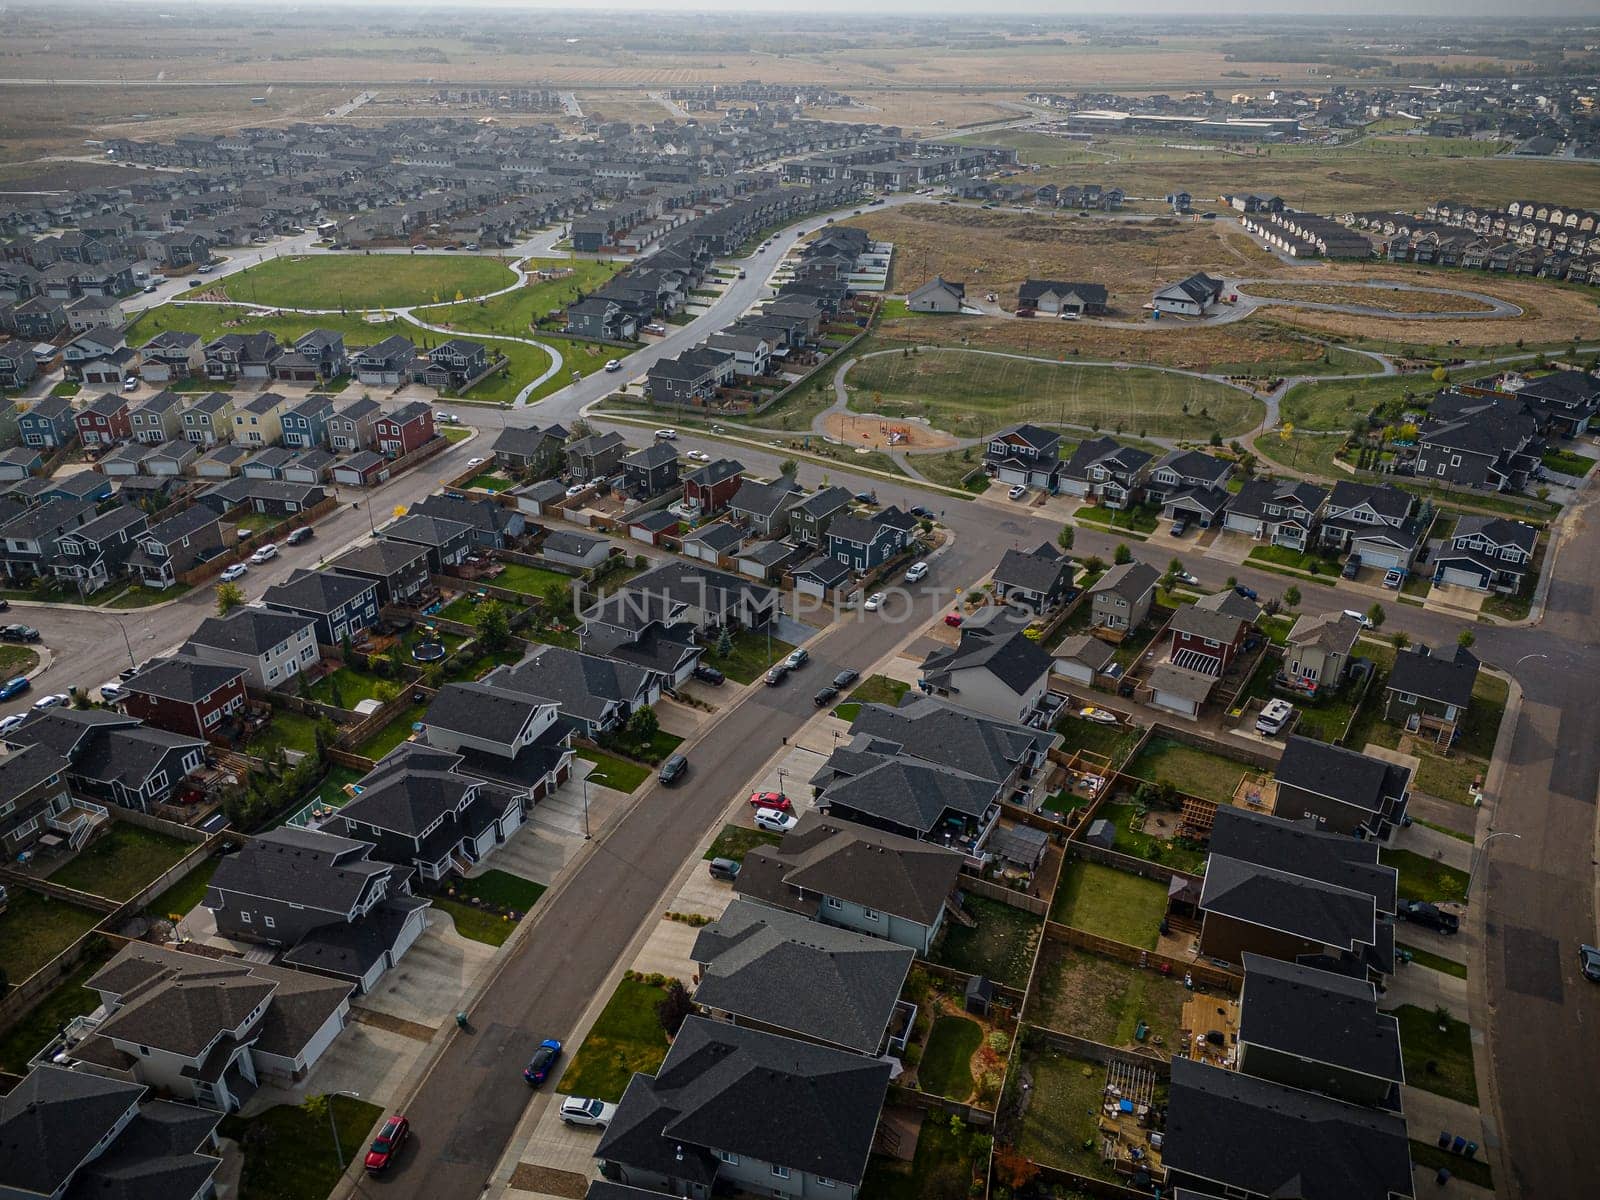 Elevated drone view of Rosewood, Saskatoon, showcasing its residential layout, green areas, and vibrant community life.